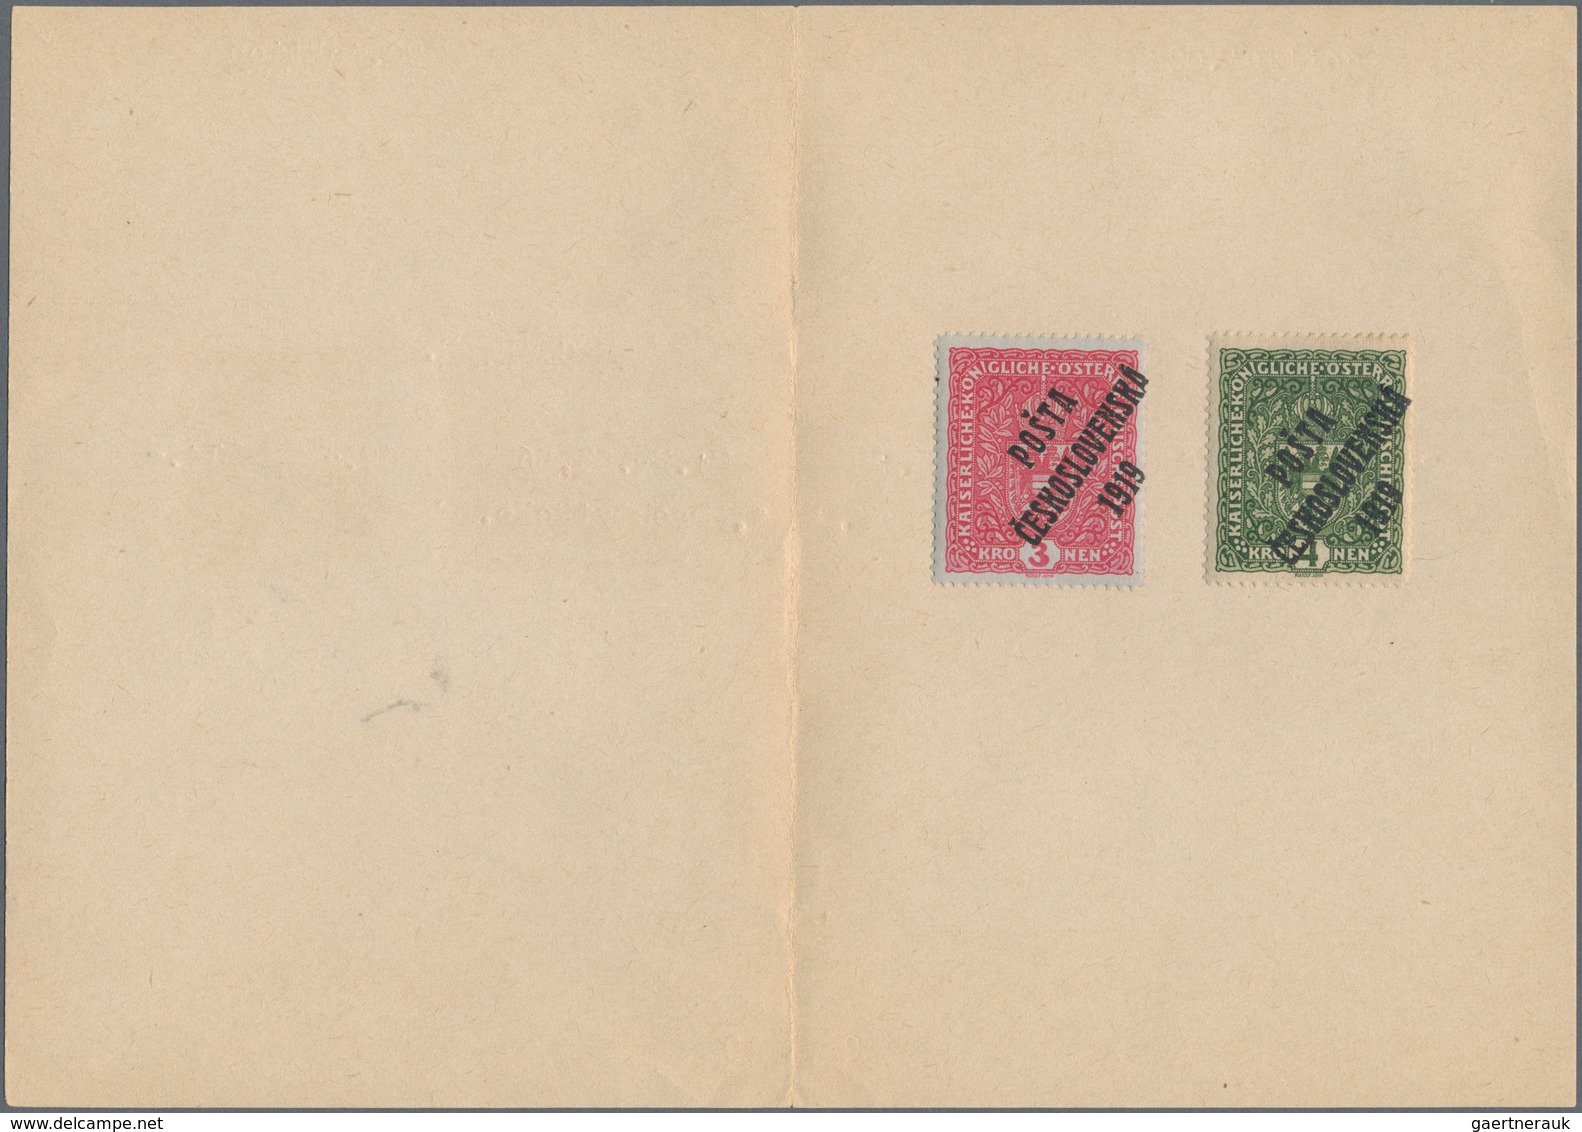 Tschechoslowakei: 1918/1920, a splendid mint lot of 28 stamps incl. a nice selection of overprints (